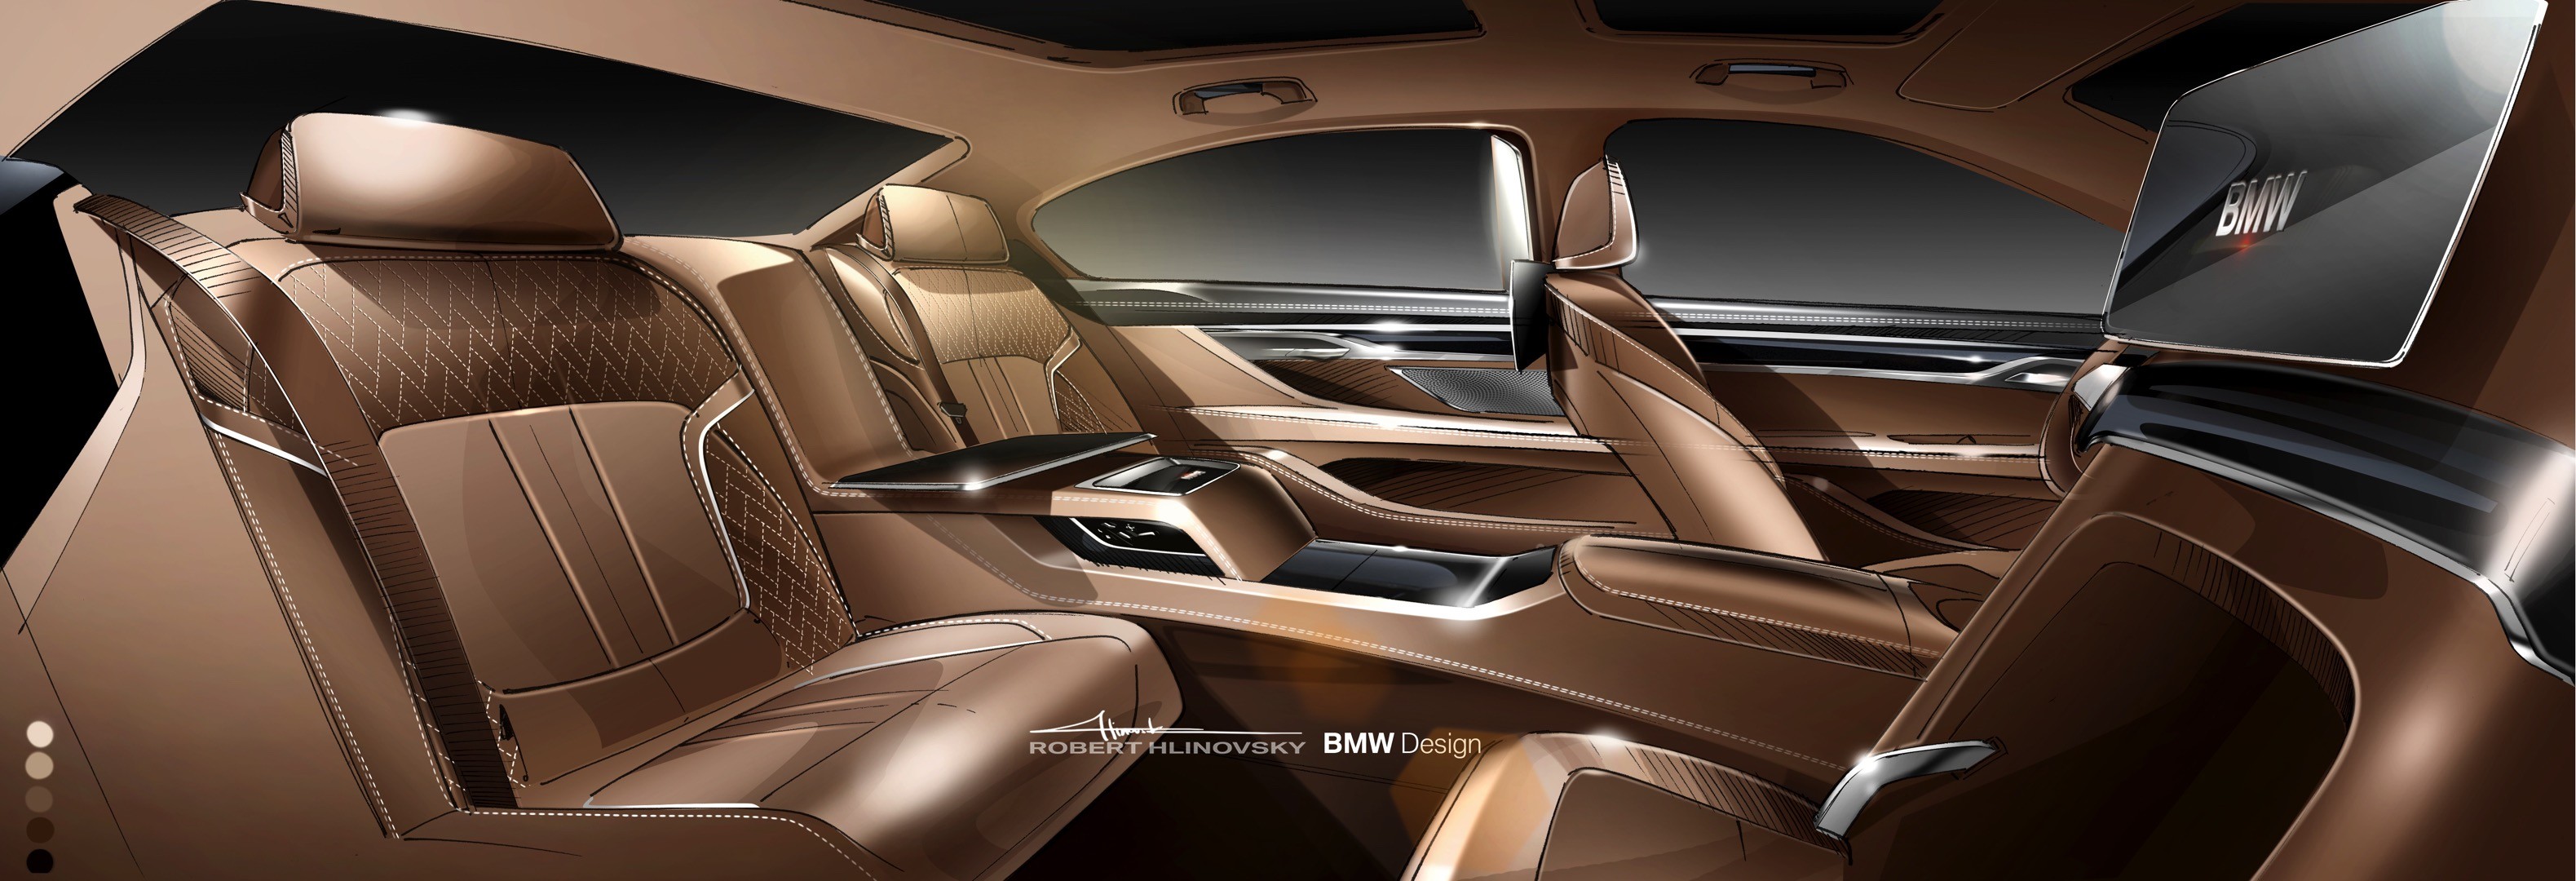 2016-bmw-7-series-finally-officially-unveiled-the-good-stuffs-inside-photo-gallery_80